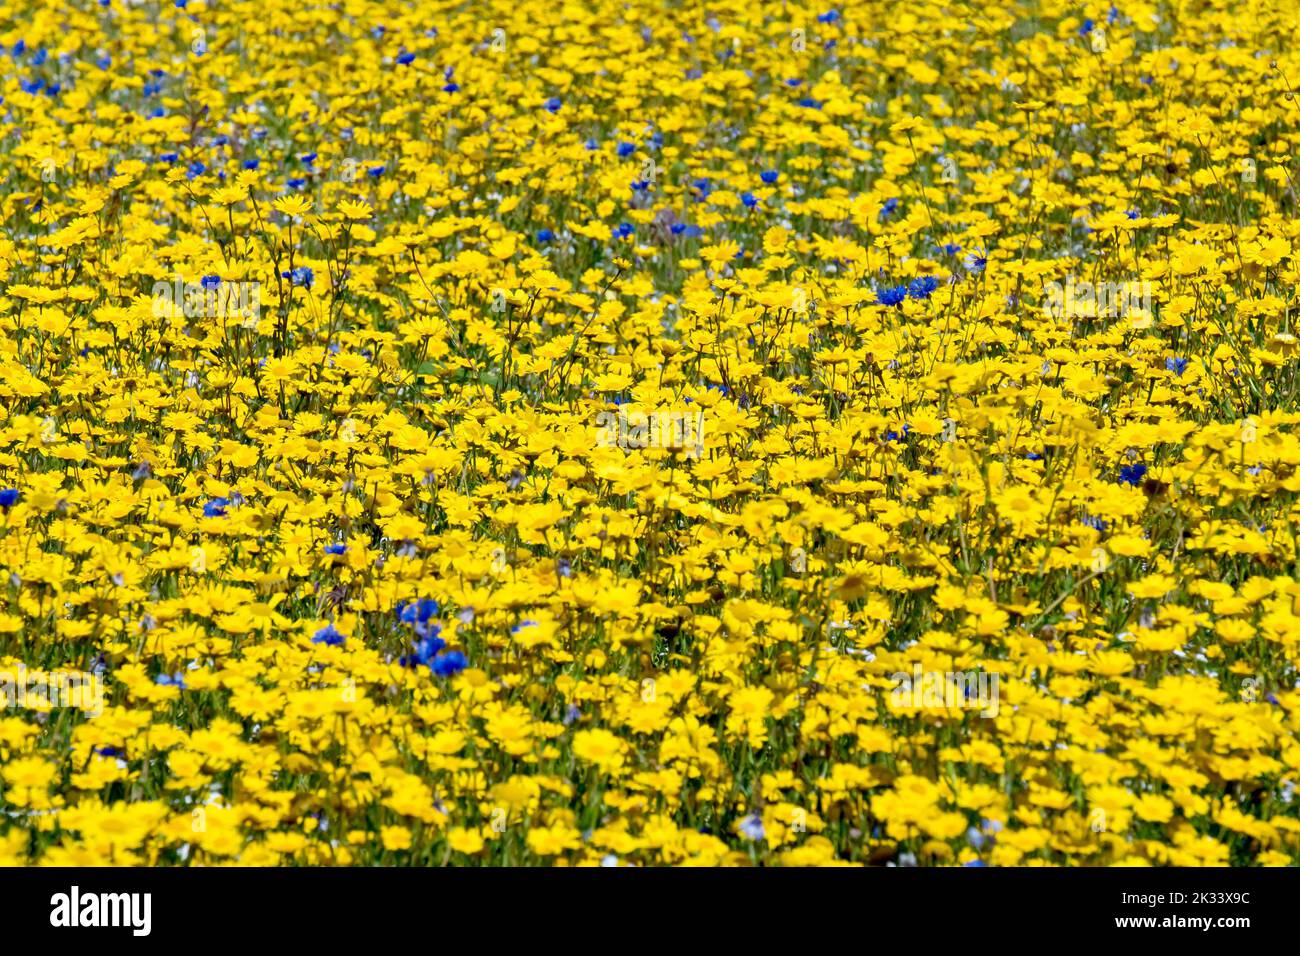 A wildflower meadow planted in an unused corner of a field, made up of mostly Corn Marigold (chrysanthemum segetum) with a few blue Cornflowers. Stock Photo